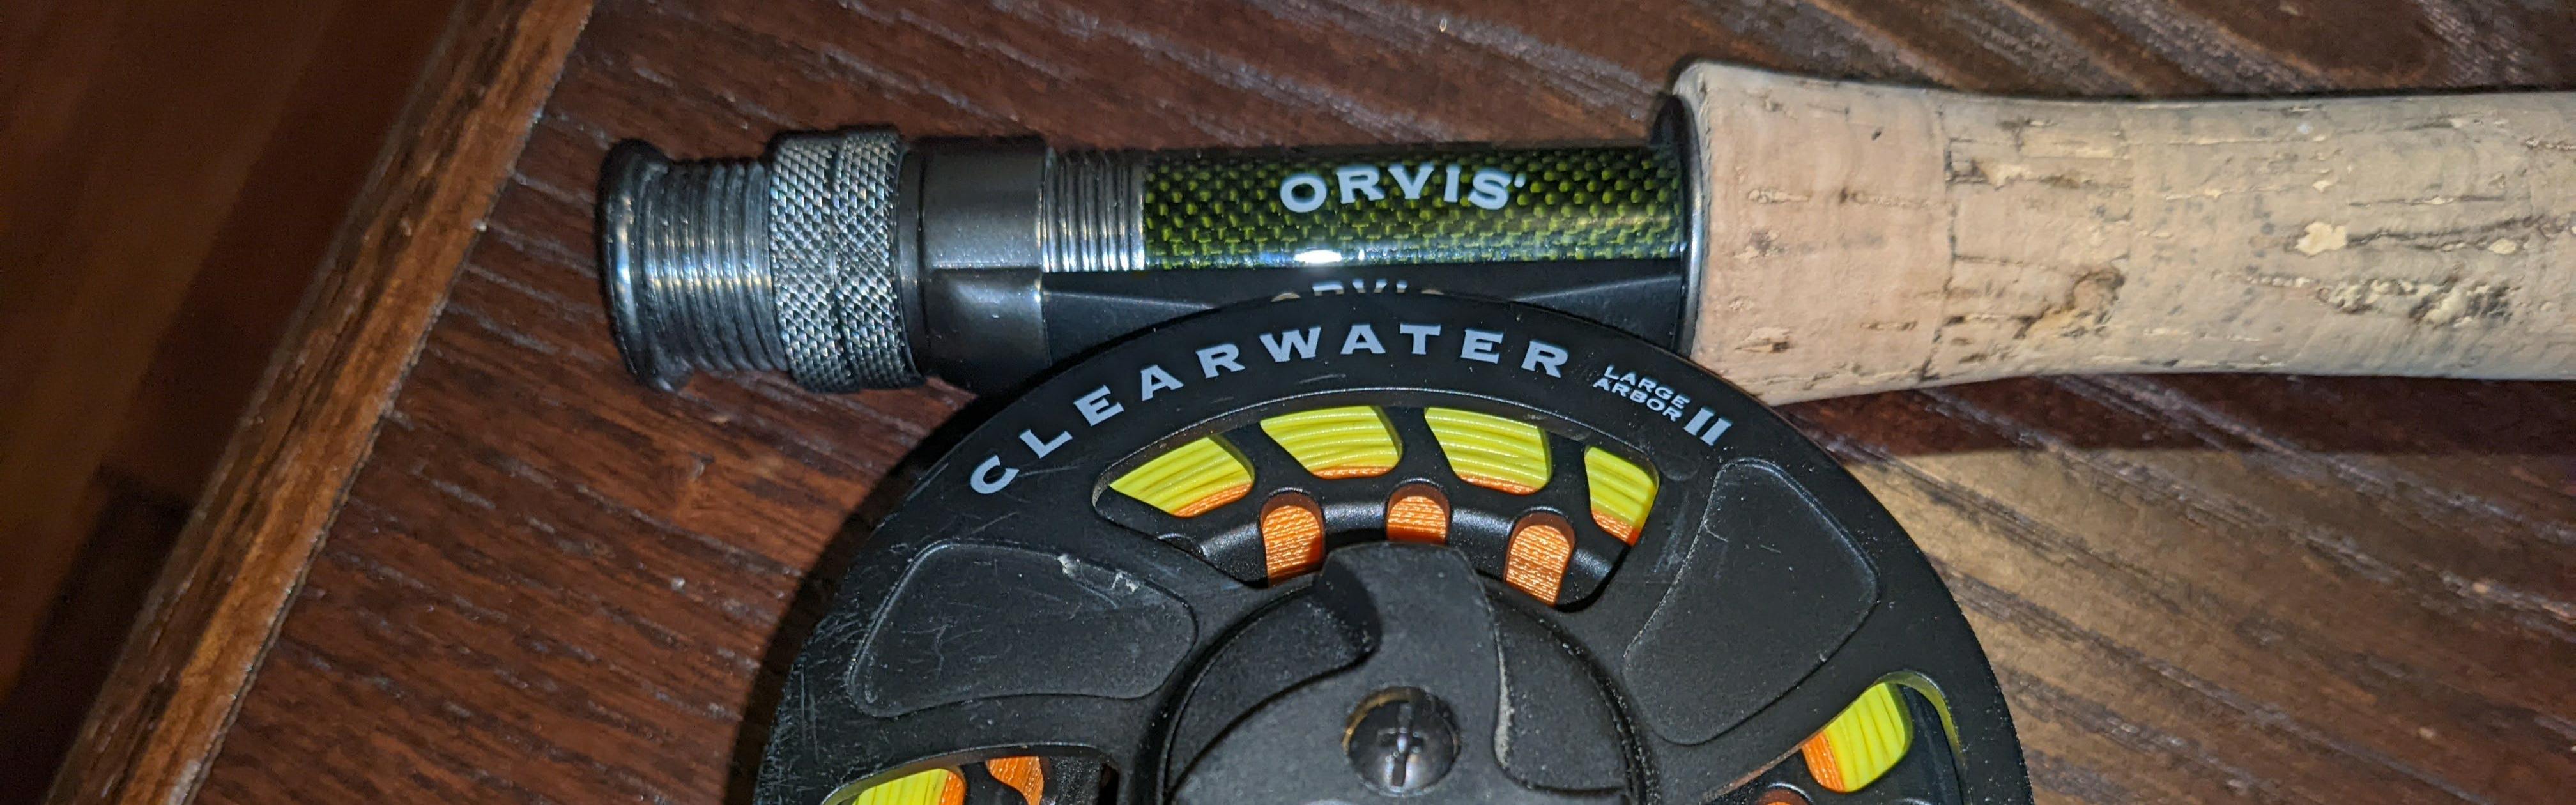 Orvis Encounter Fly Outfit